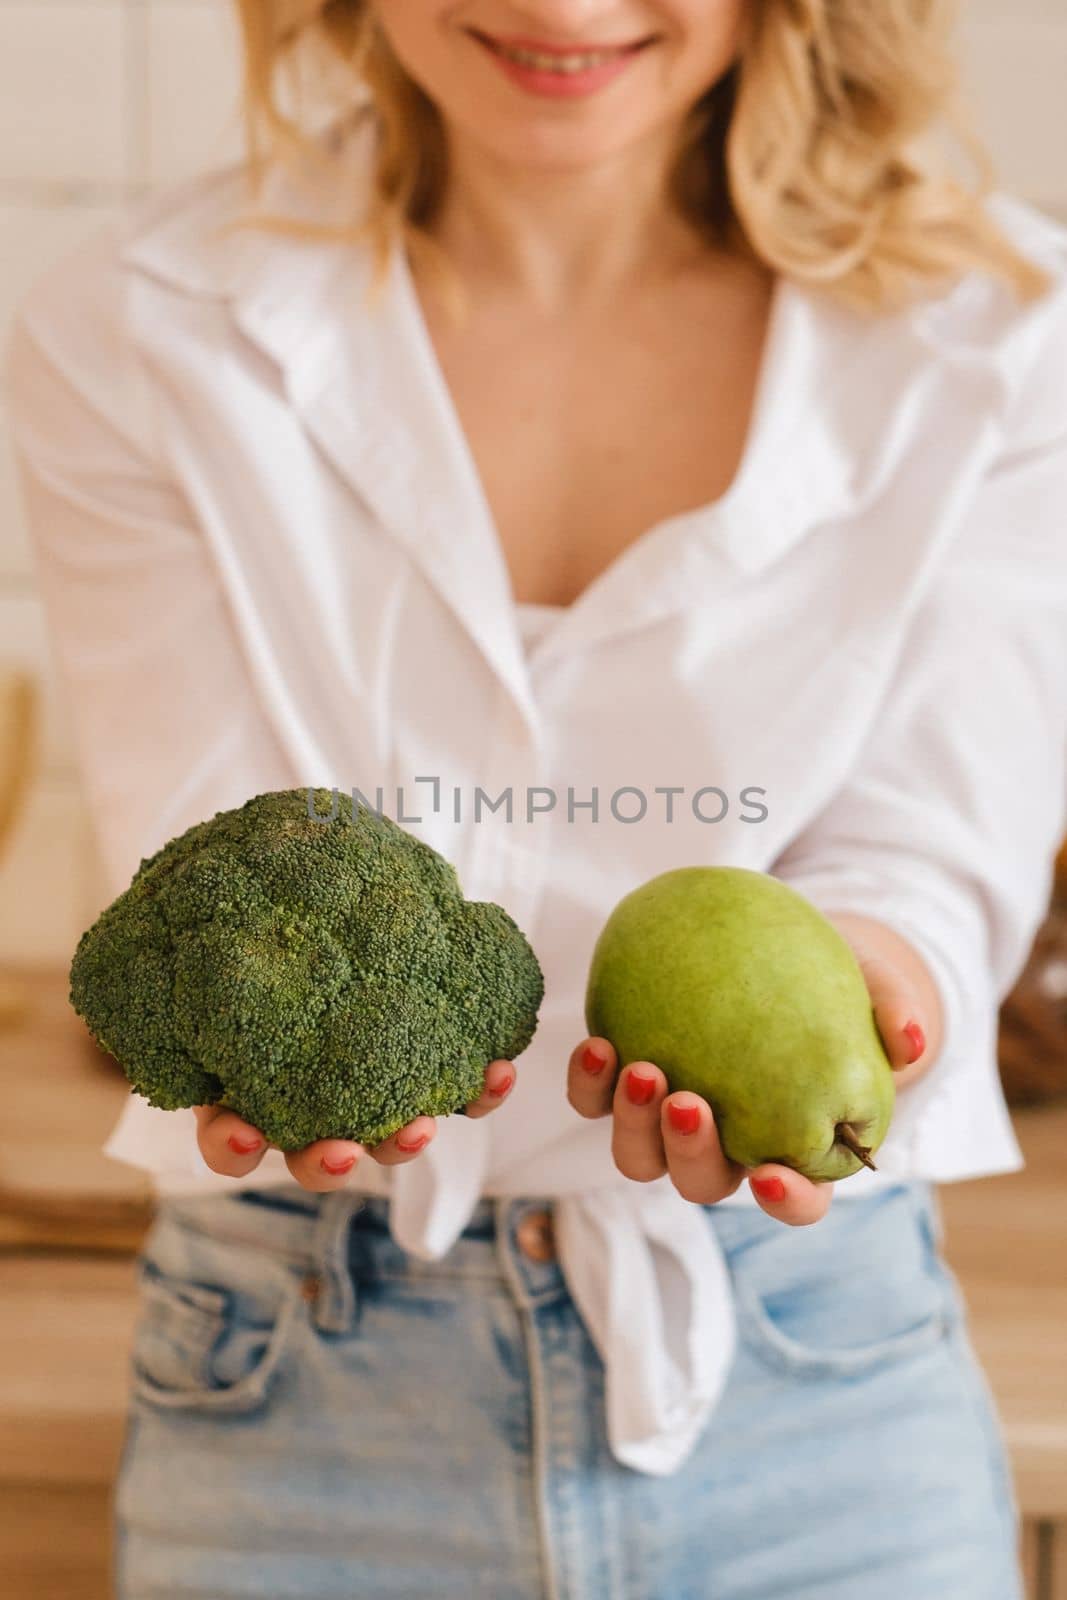 The girl holds a pear and broccoli in her hands. The hostess holds vegetables and fruits in her hands.